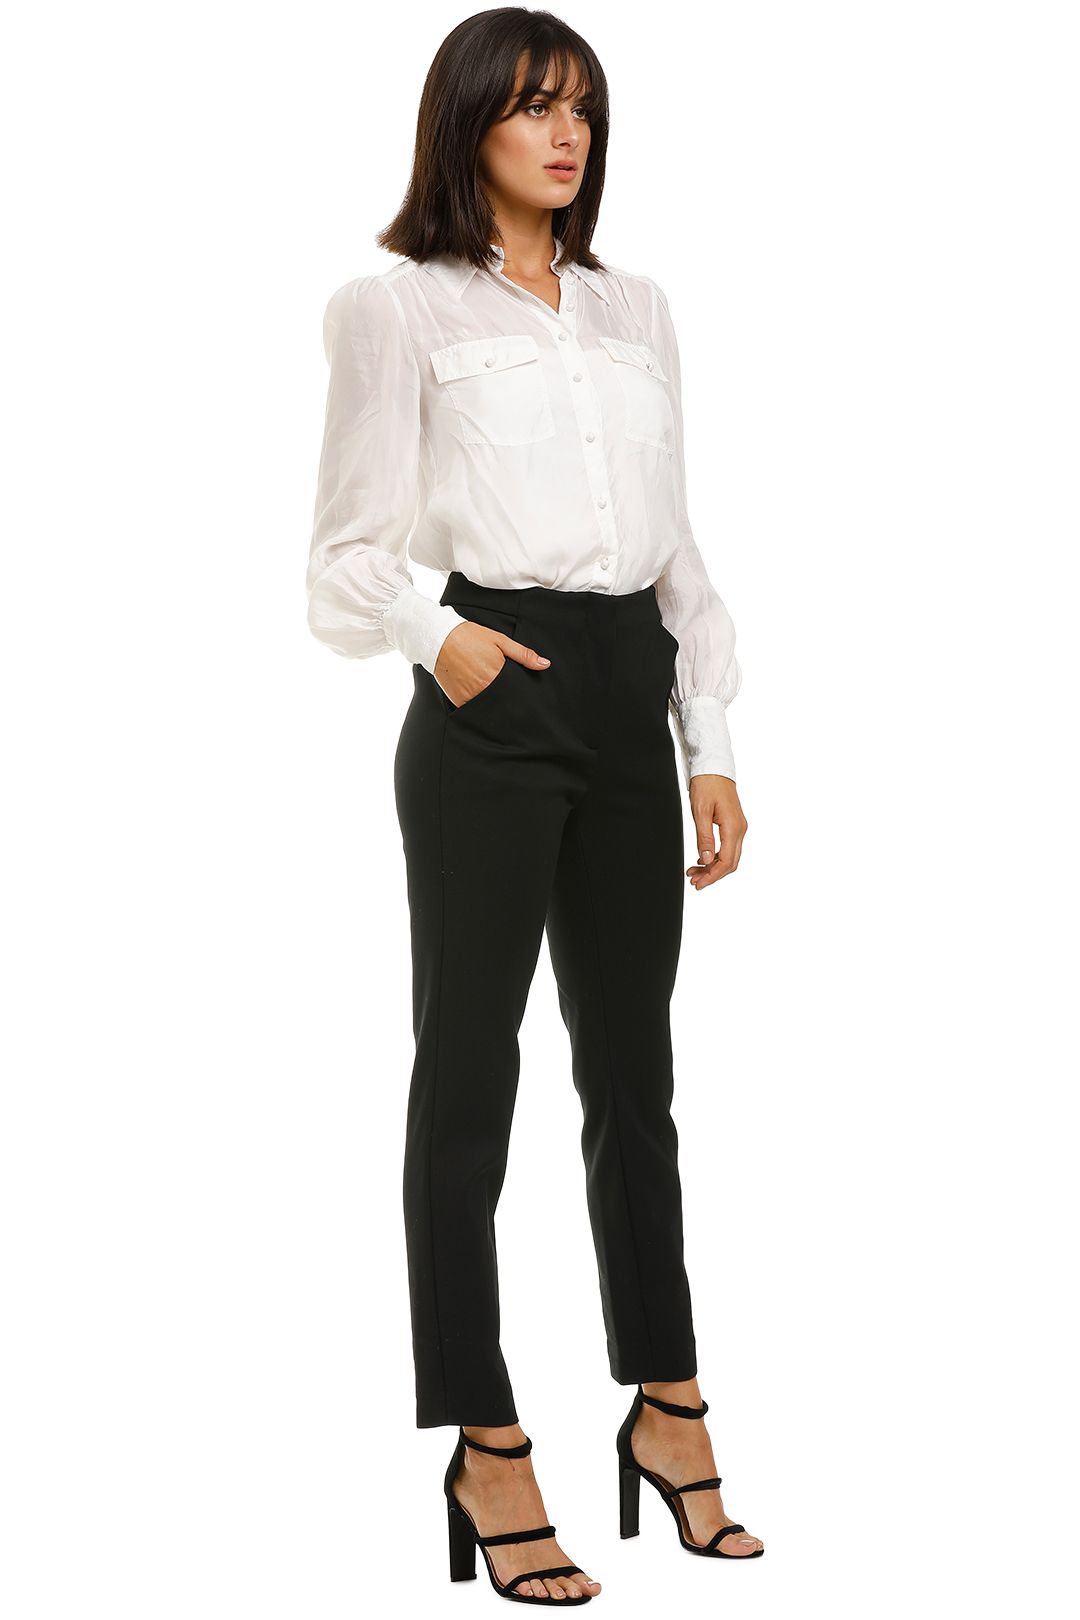 Country-Road-High-Waist-Pant-Black-Side